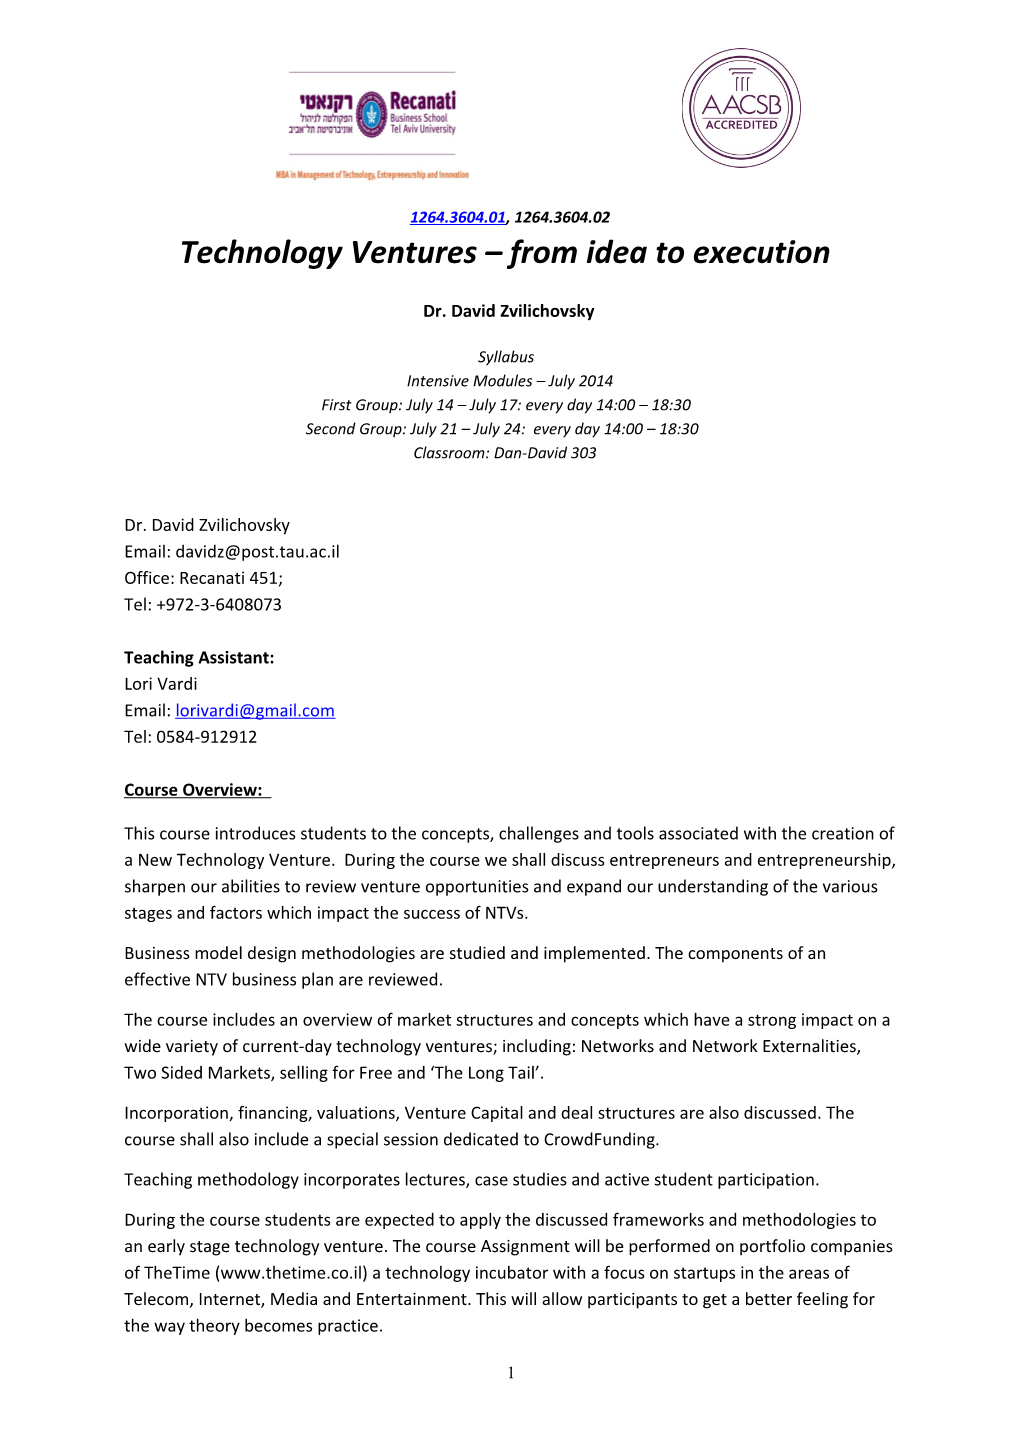 Technology Ventures from Idea to Execution